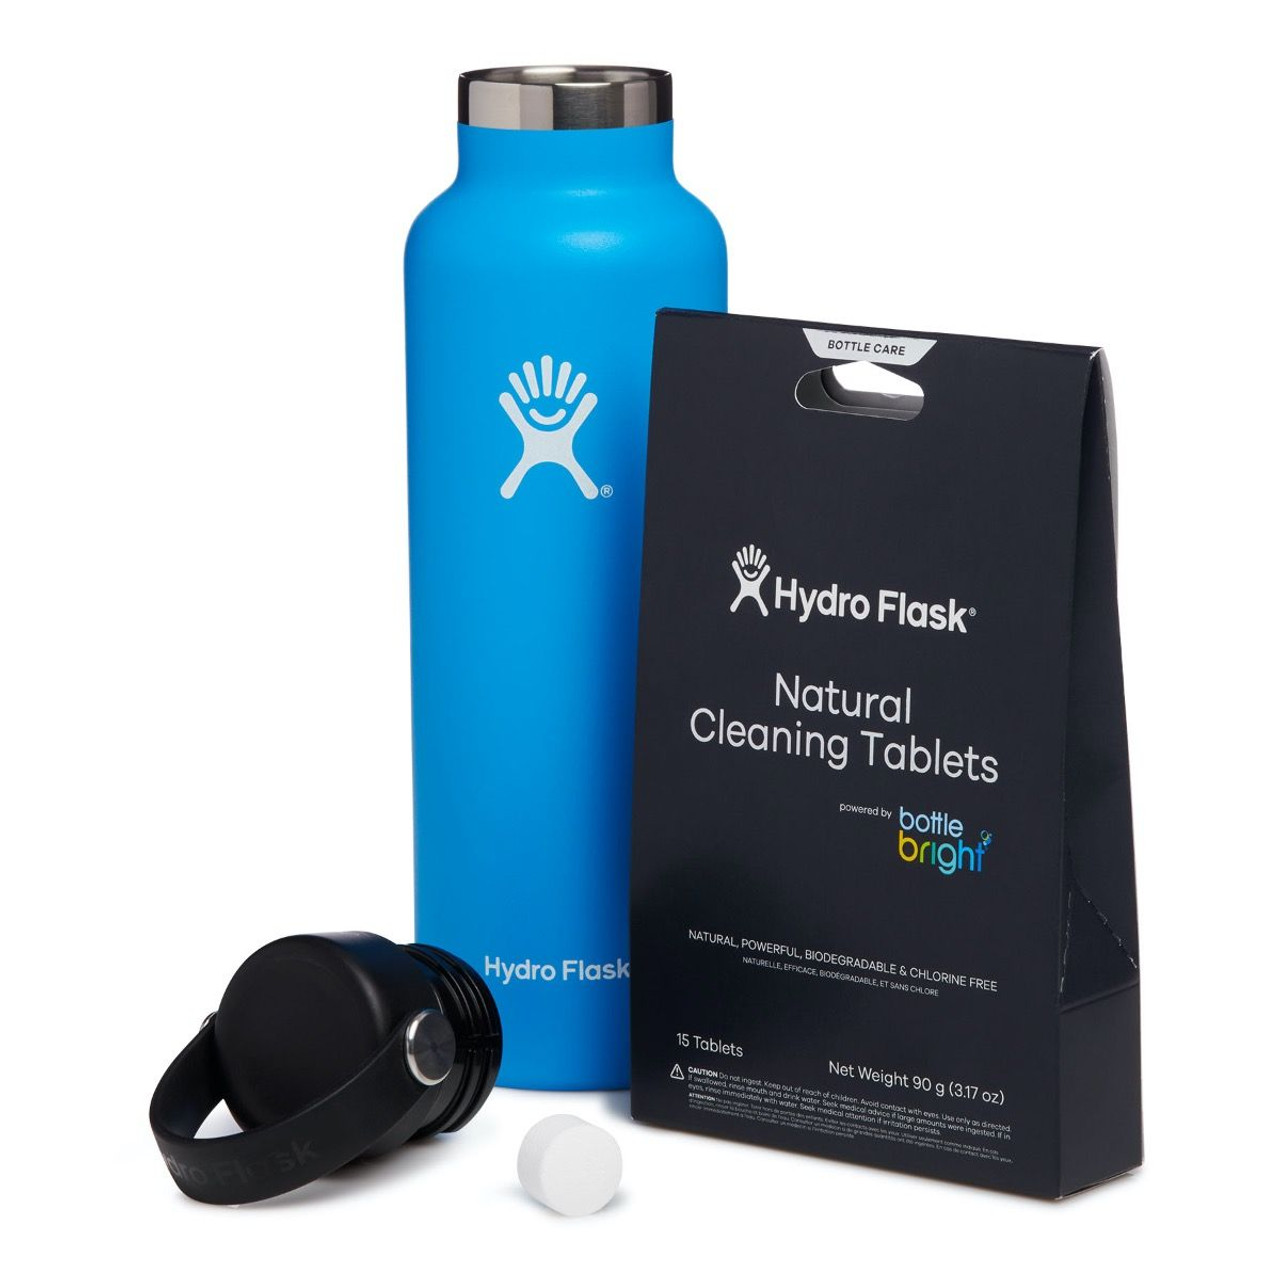 Hydroflask Natural Cleaning Tablets